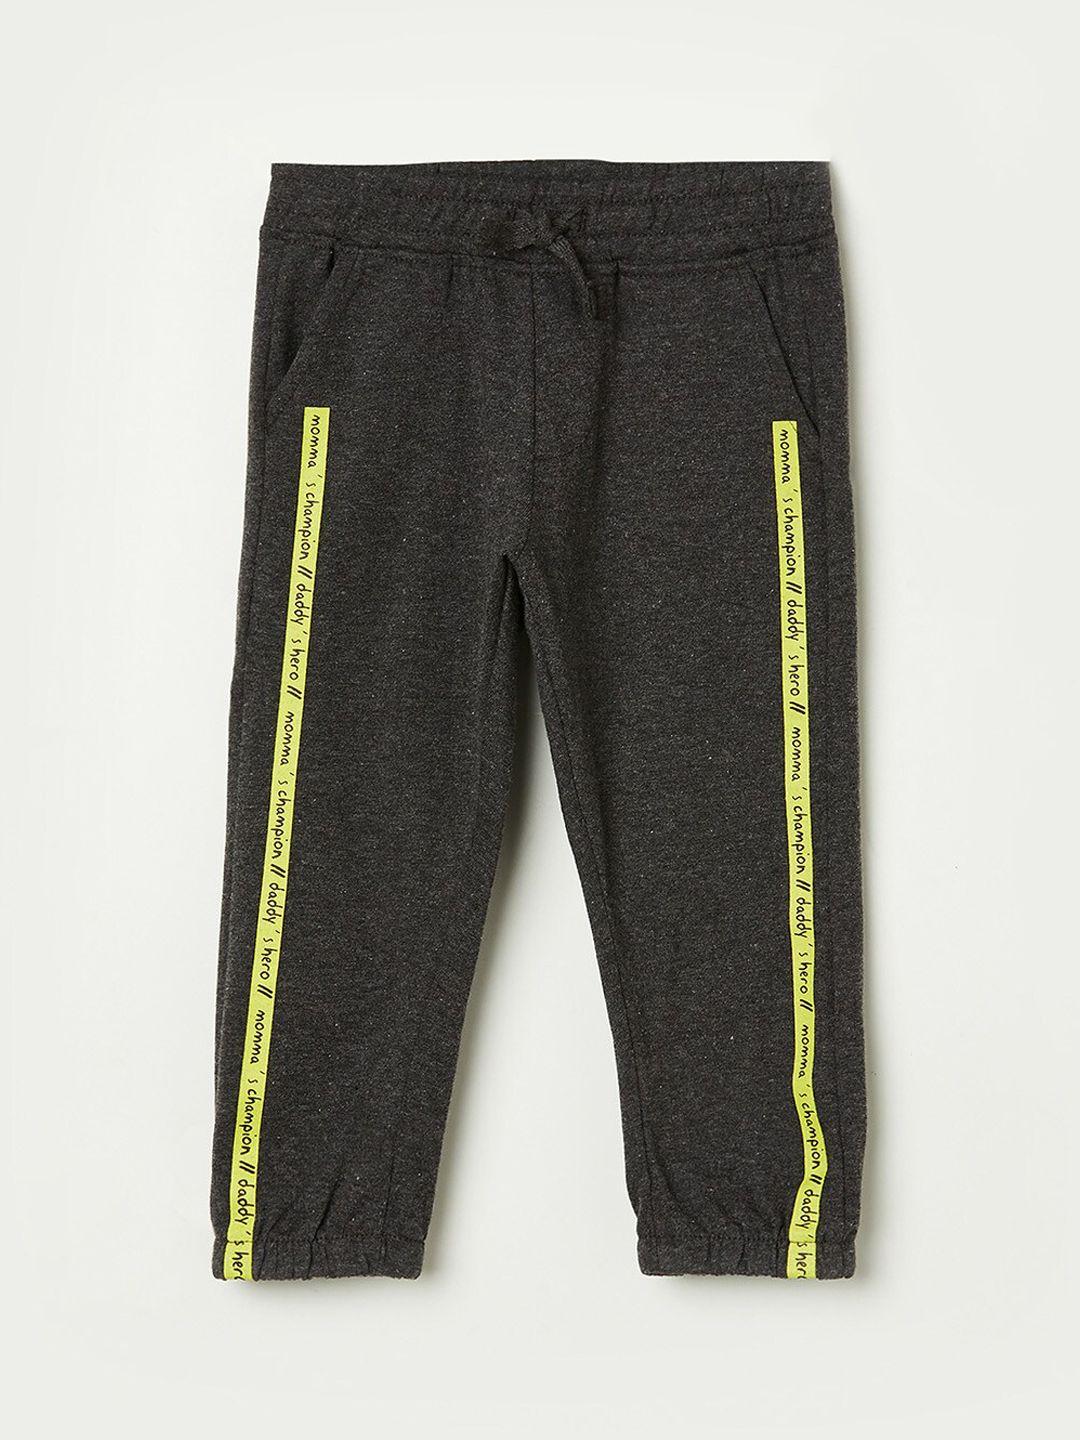 Juniors by Lifestyle Boys Charcoal Grey & Yellow Striped Cotton Jogger